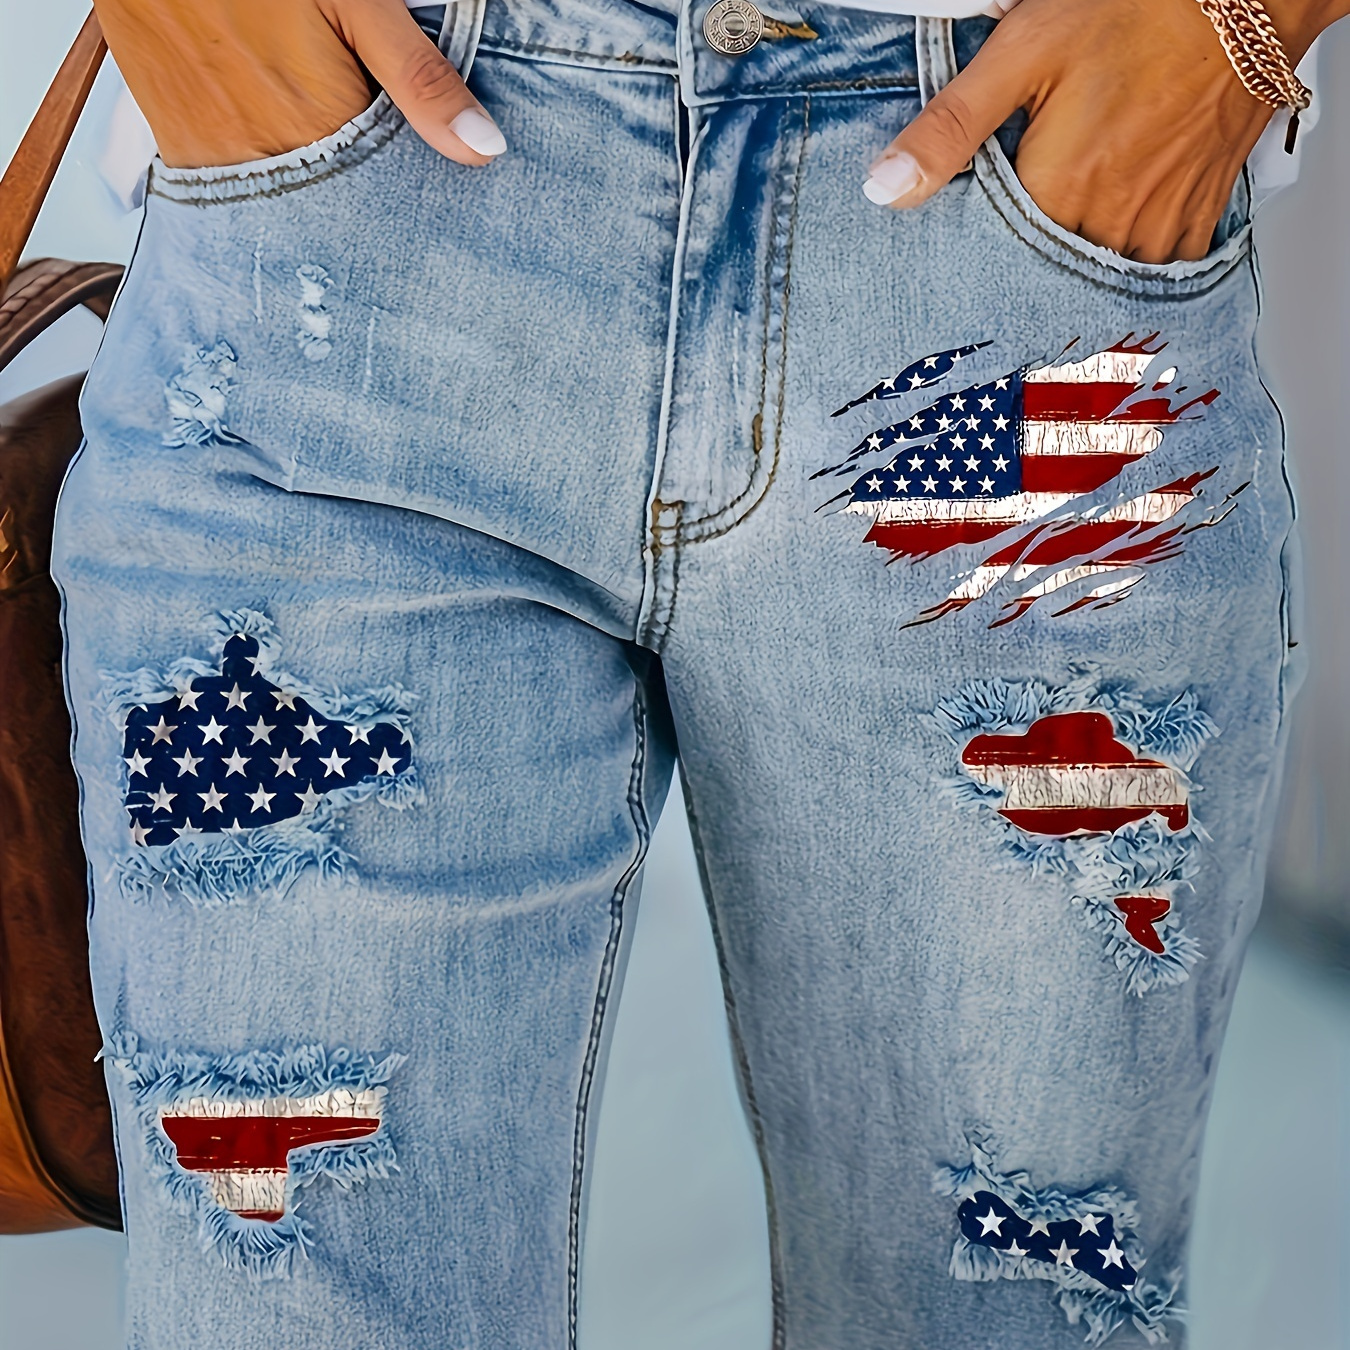 

Women's High Waist Distressed Denim Bermuda Shorts With American Flag Patchwork, Frayed Hem, Plus Size Fashion, Stretchable Casual Jean Independence Day 4th Of July